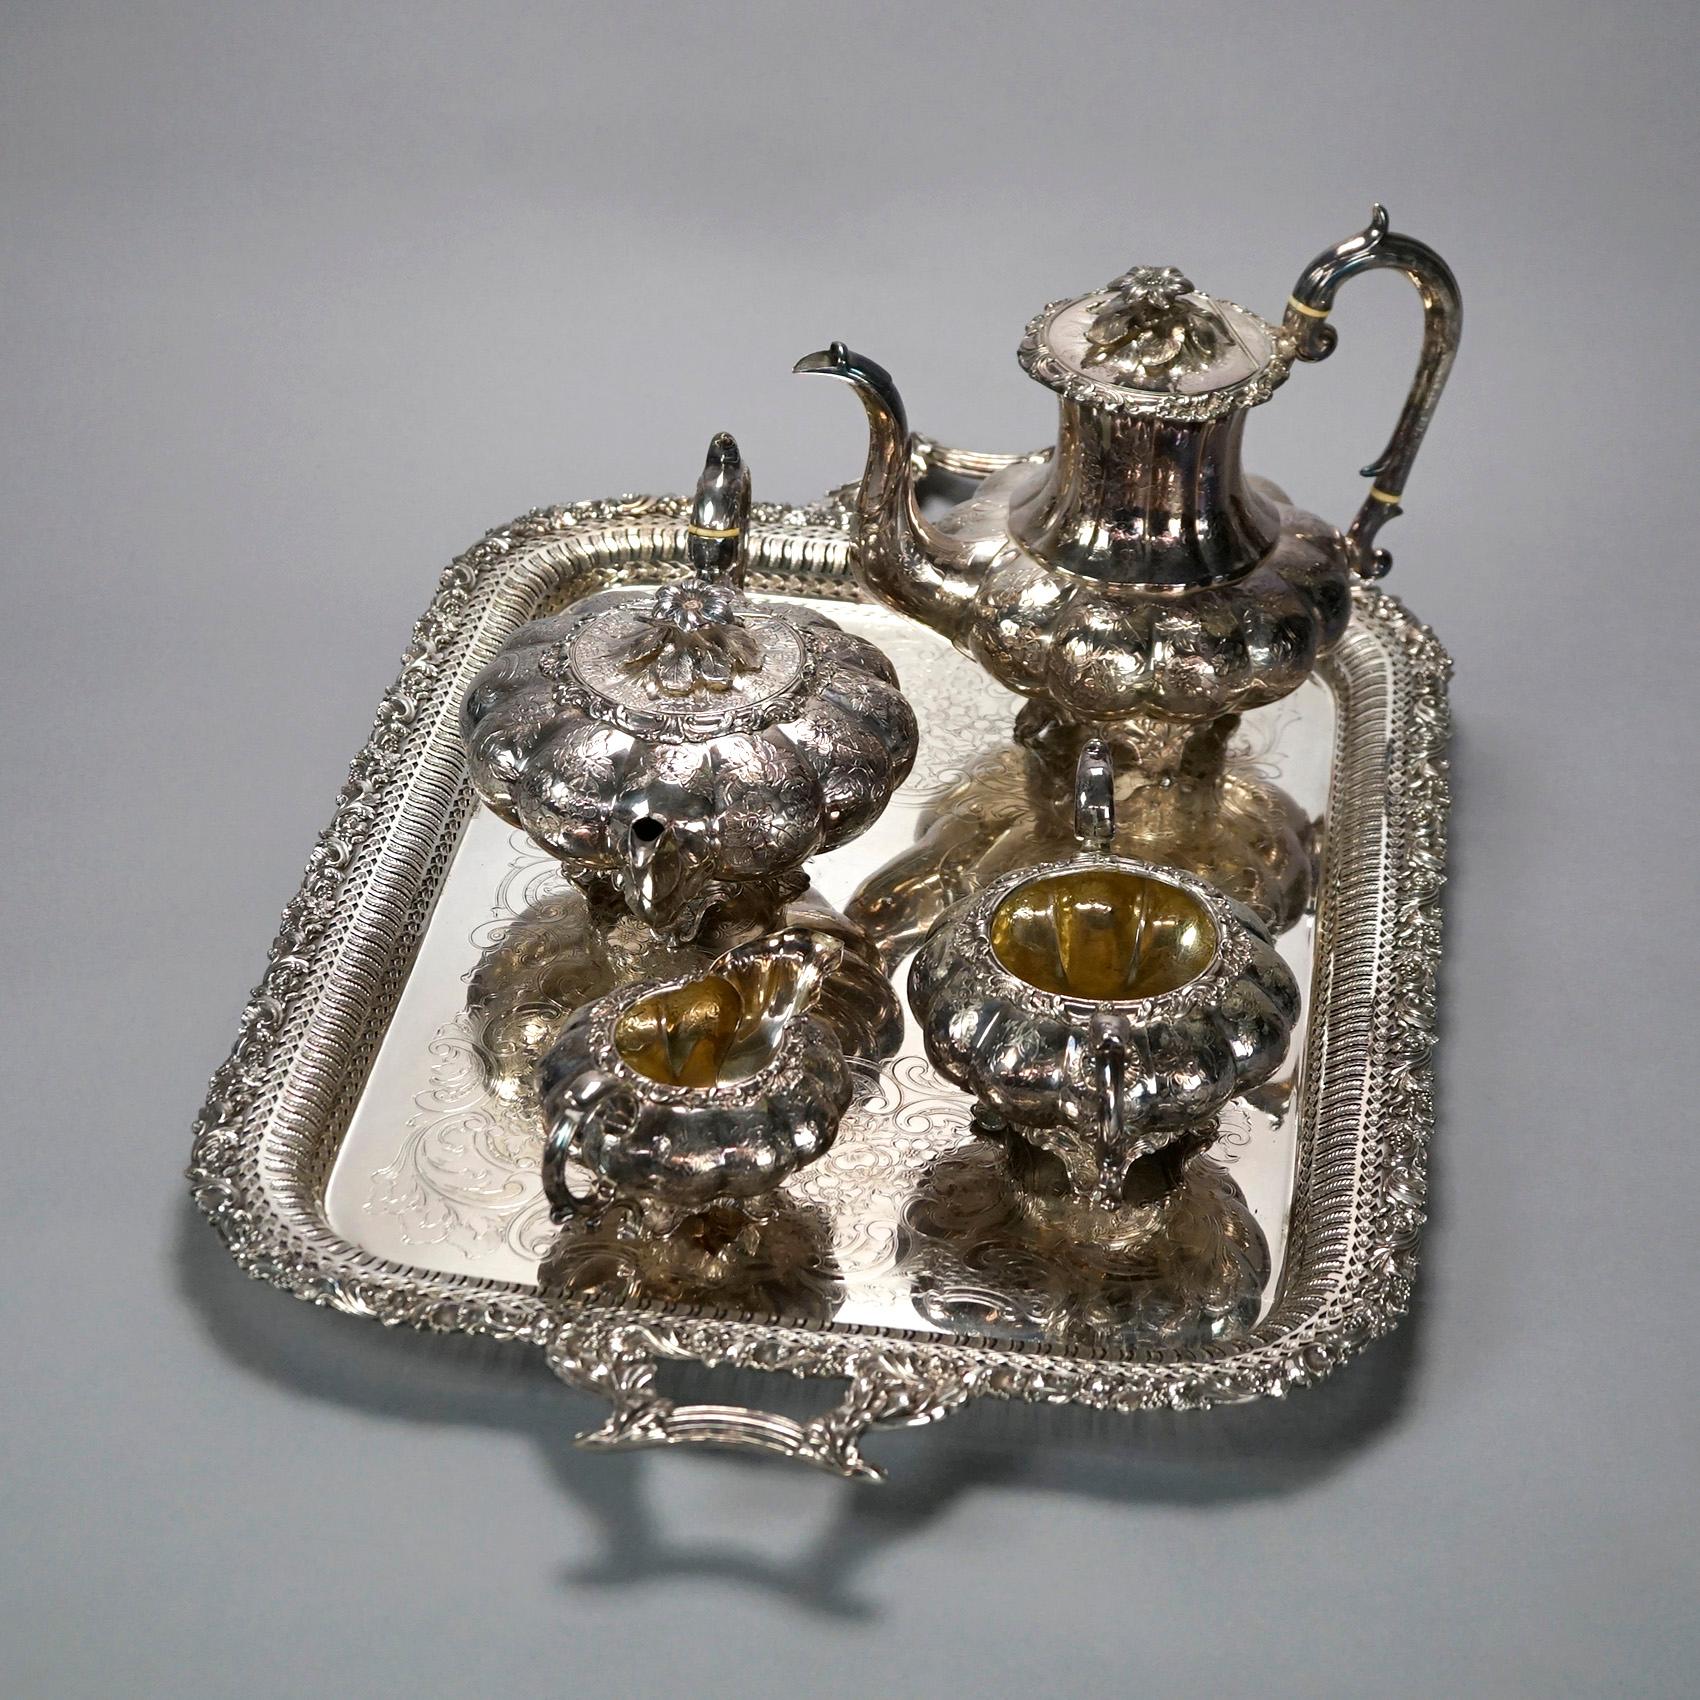 AN antique English tea set offers silver plate melon form tea pot, coffee pot, creamer, sugar and under tray, floral engraved decoration throughout, 19th century

Measures- 
Sugar Bowl: 4.5''H x 8.75''W x 5.5''D
Hot Water Pot: 6''H x 12.25''W x